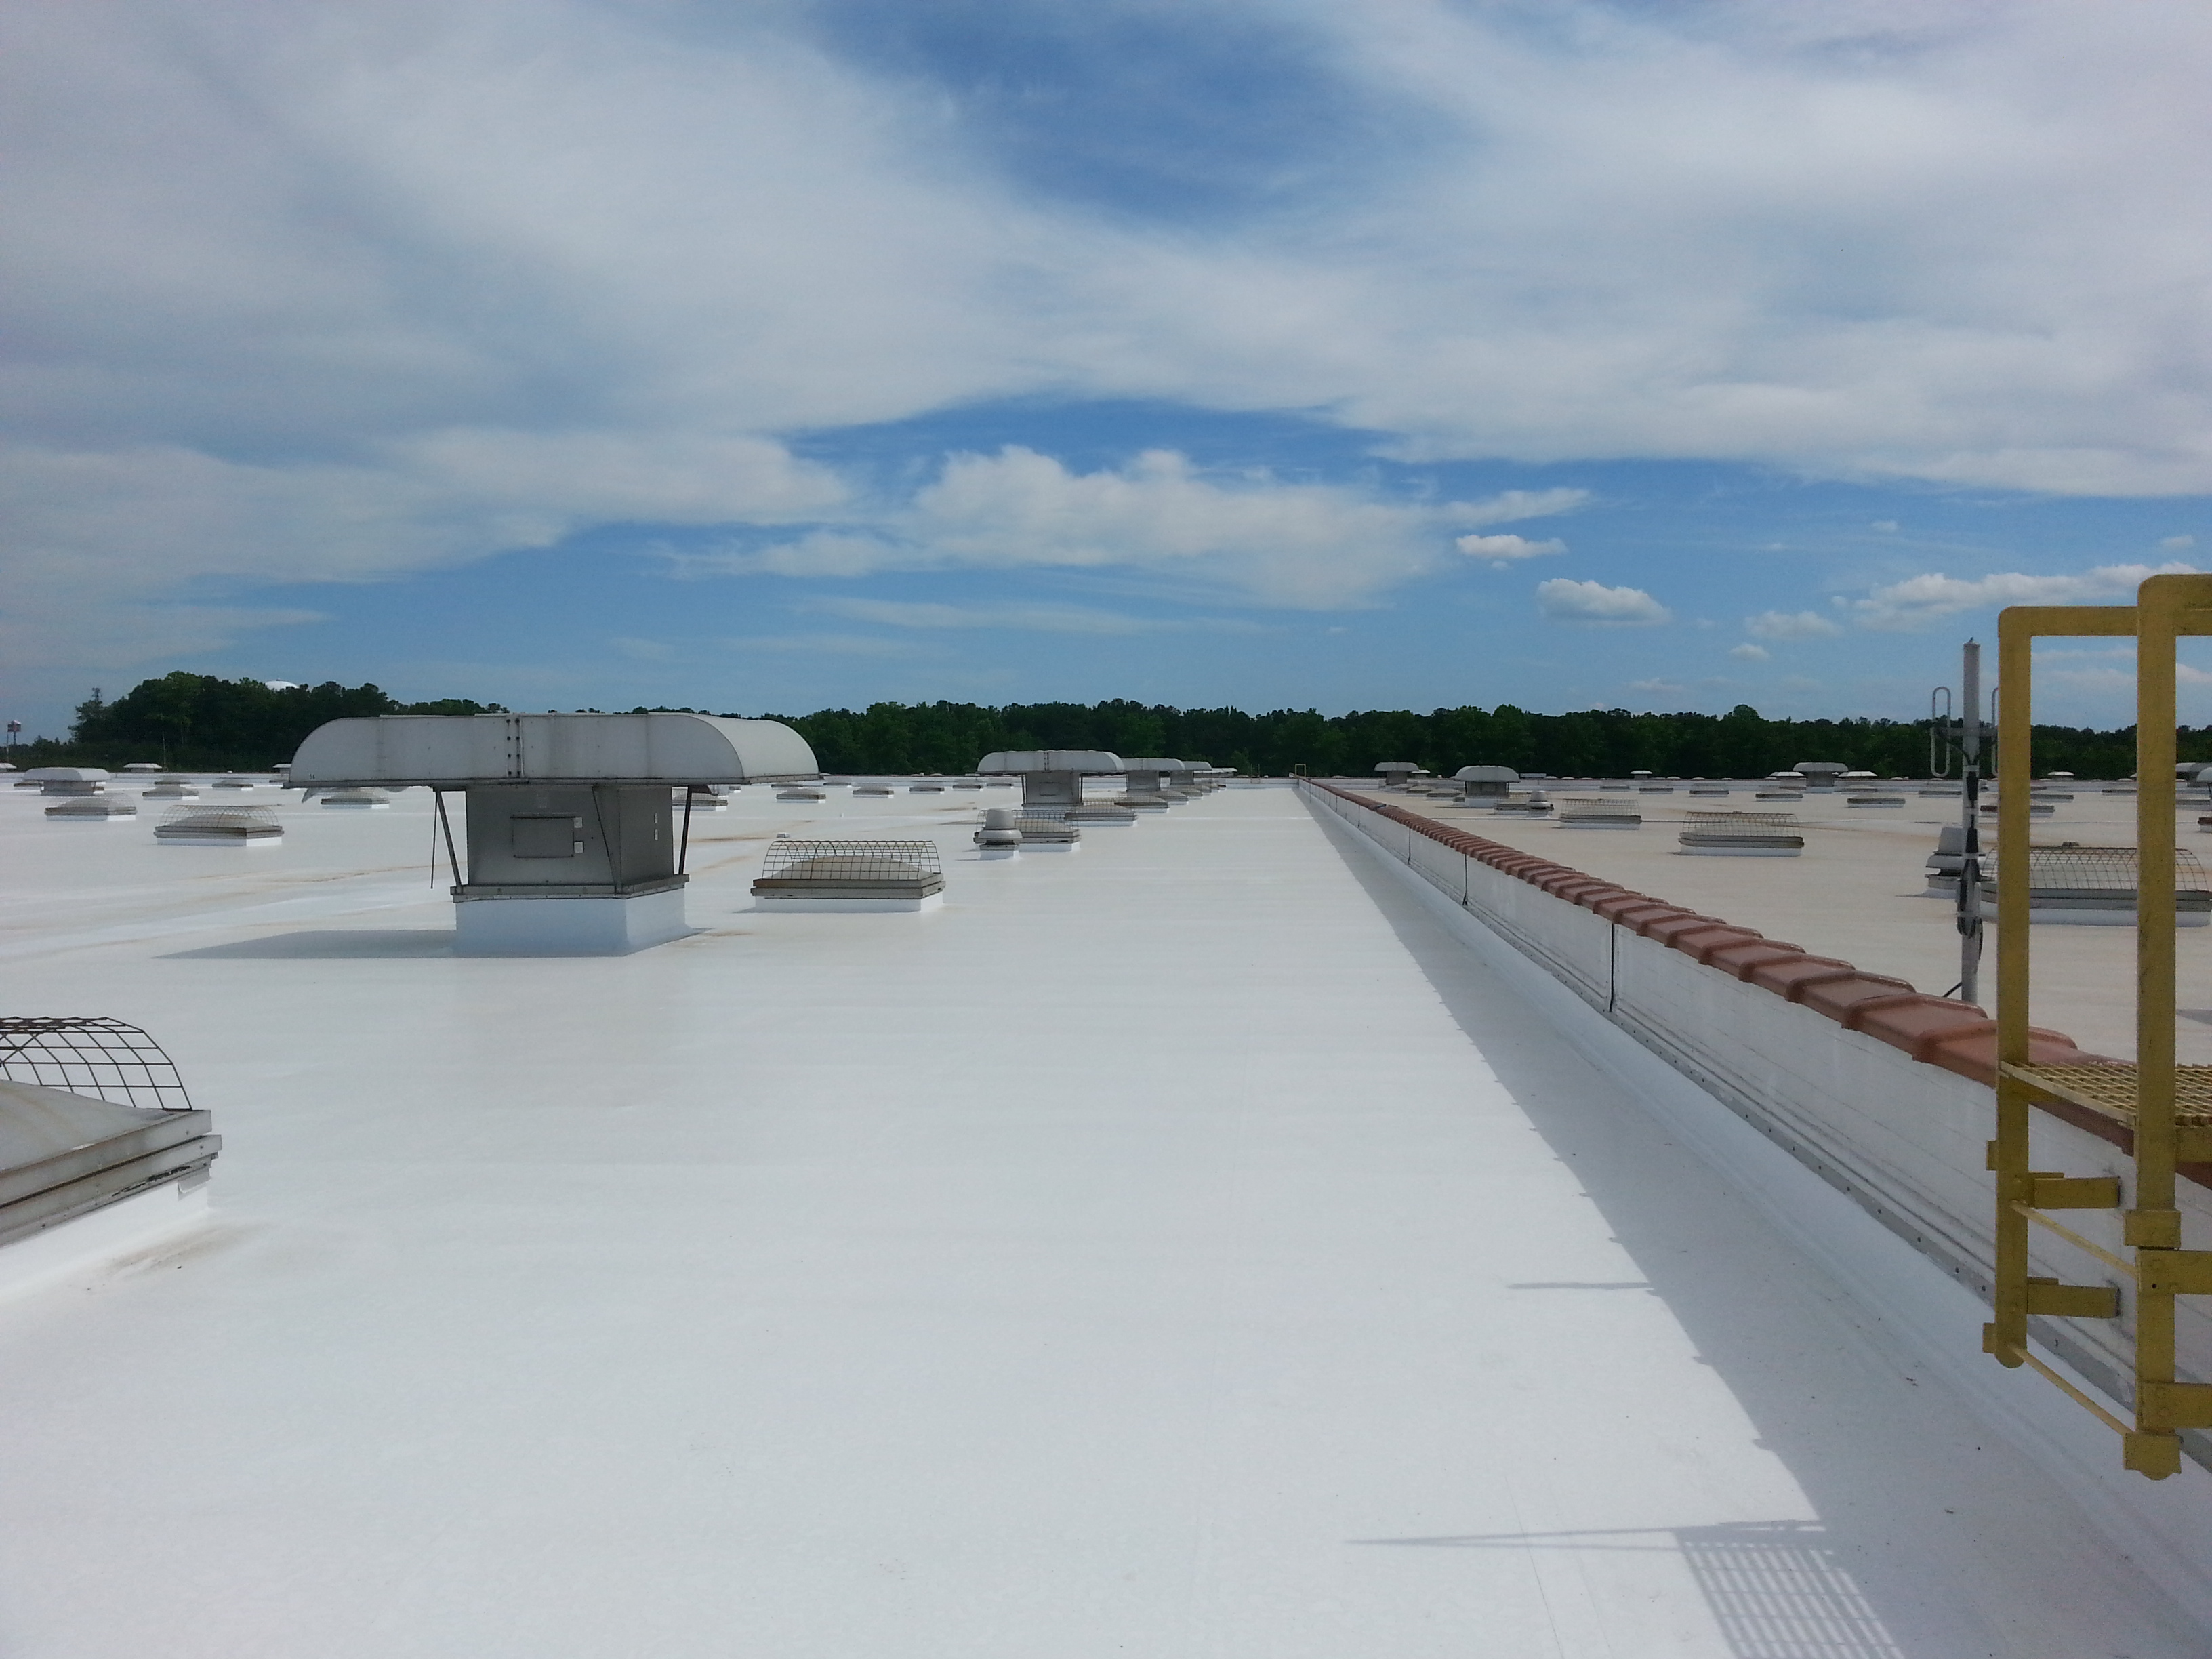 Flat Roof Options - Check Out Number Five! | Progressive ...